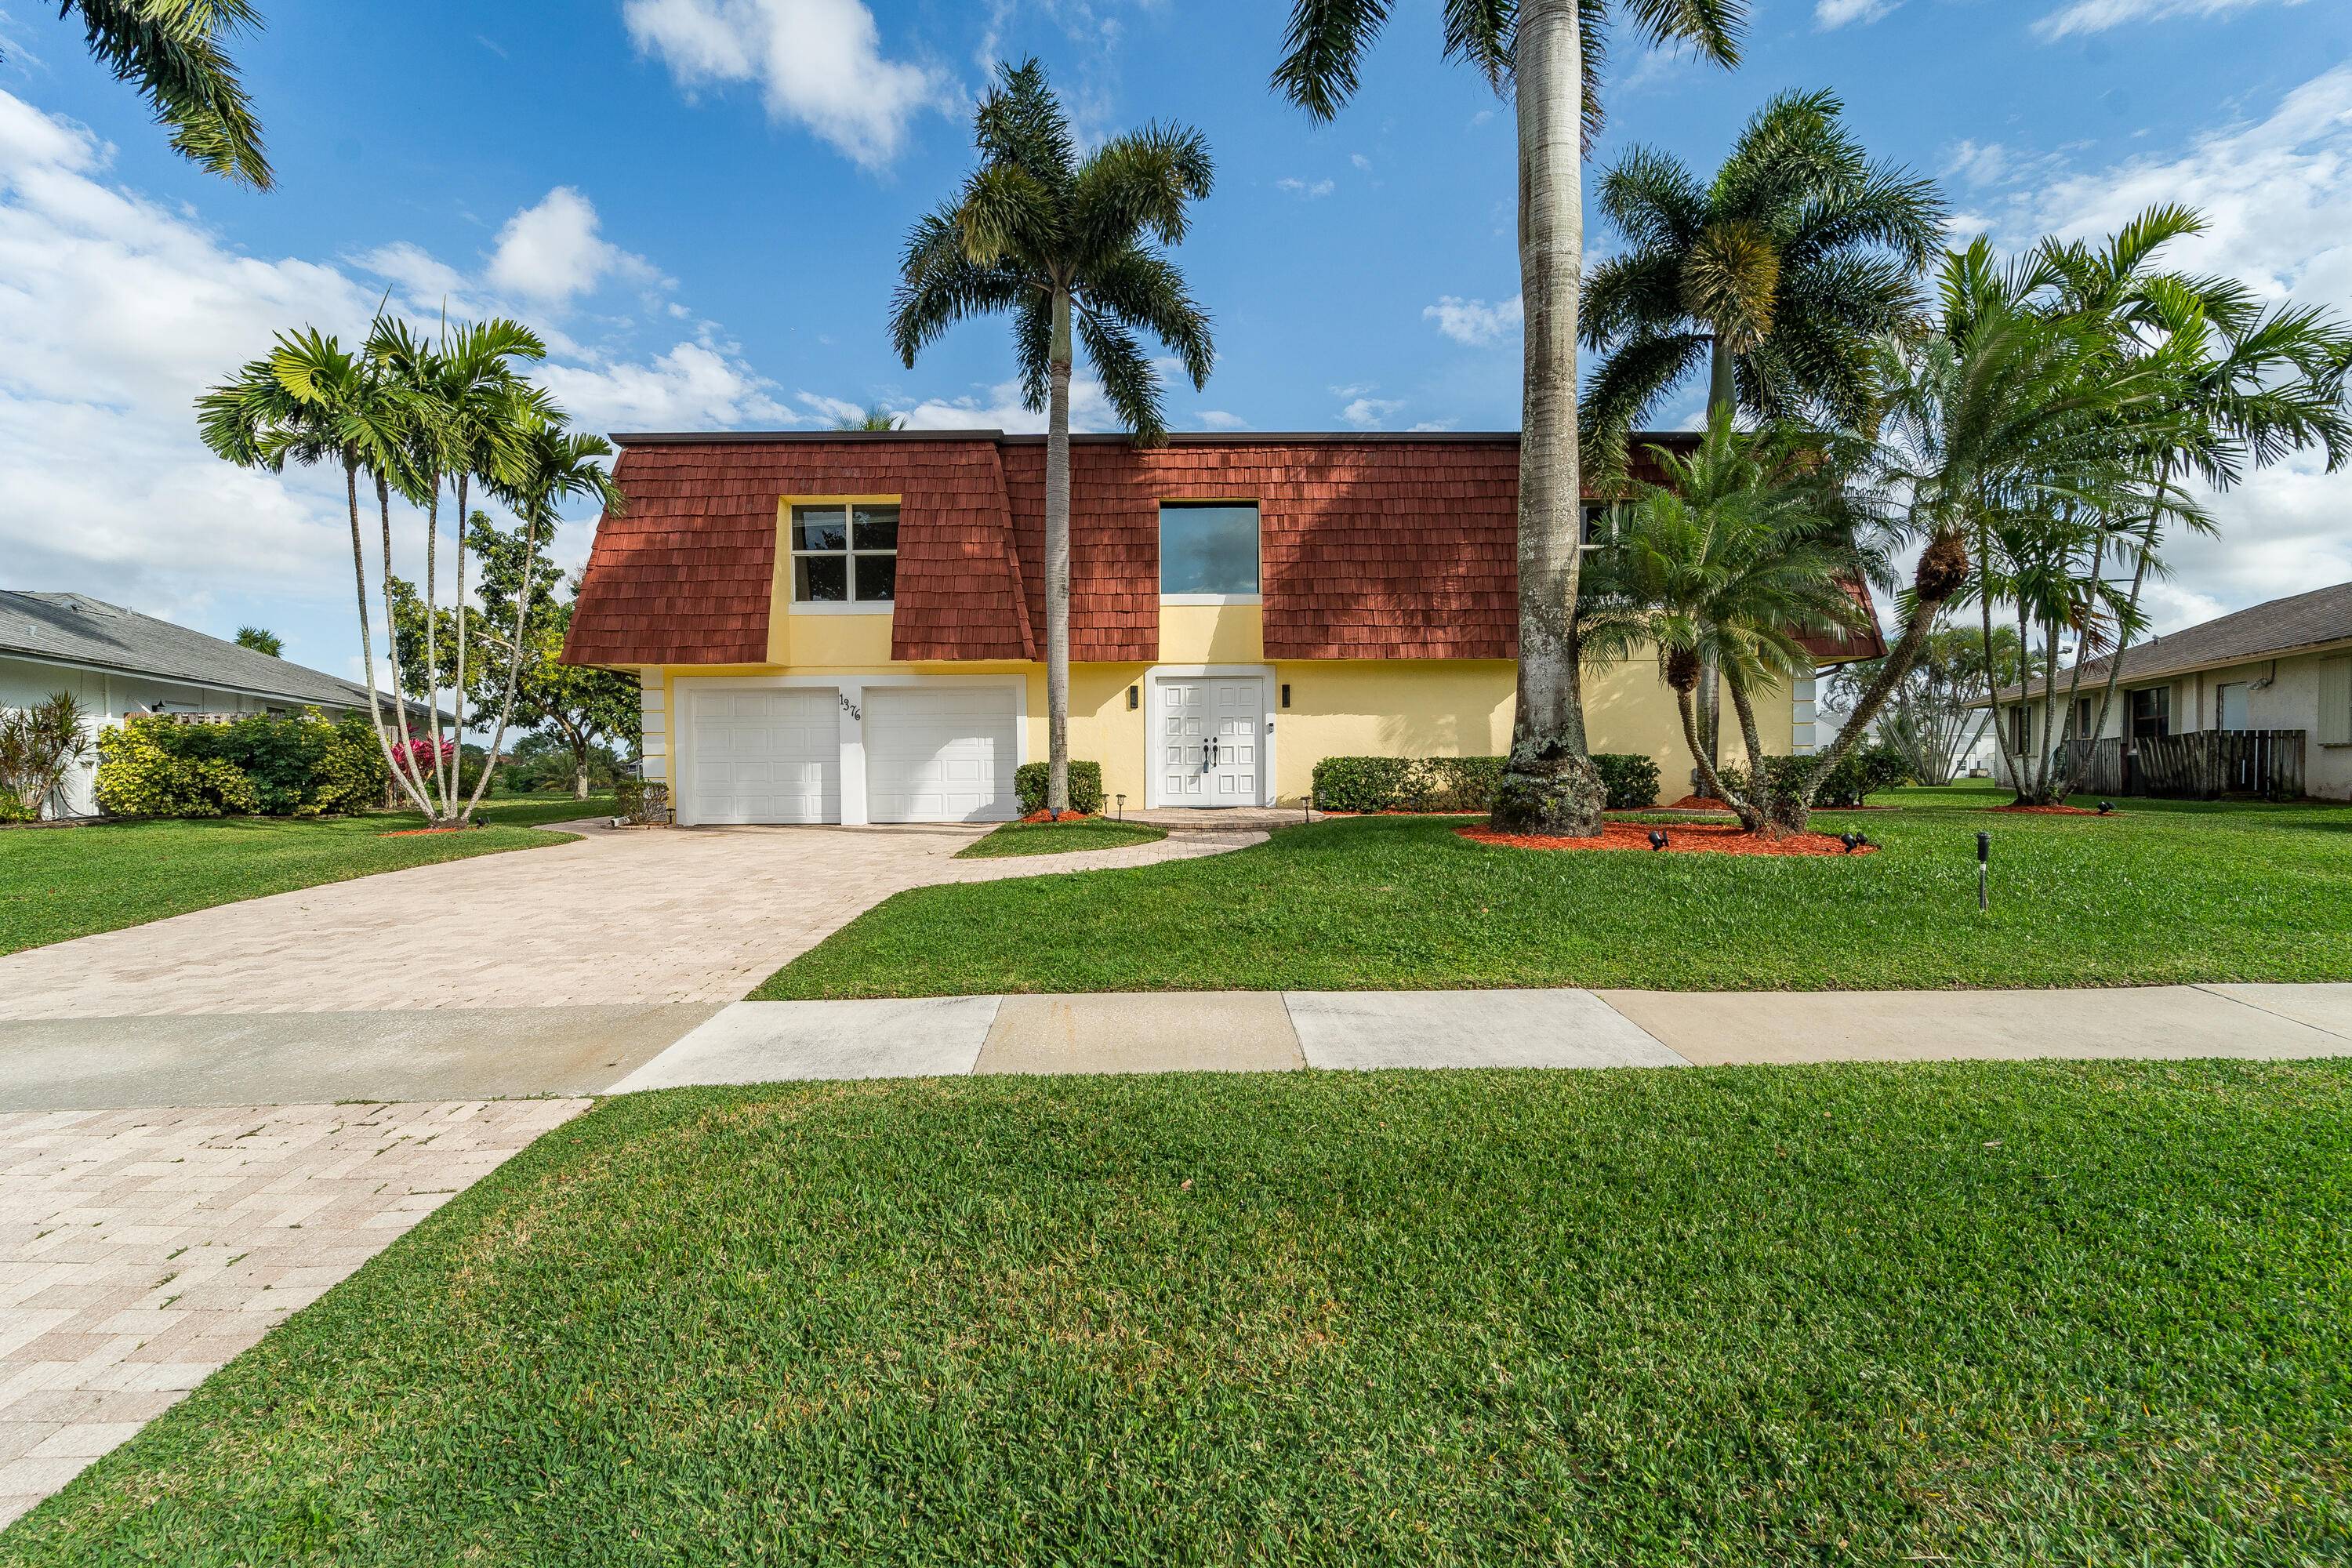 Discover waterfront living in Wellington, FL, with this luxurious Single Family 2, 772 sqft rental home on Sailboat Circle.